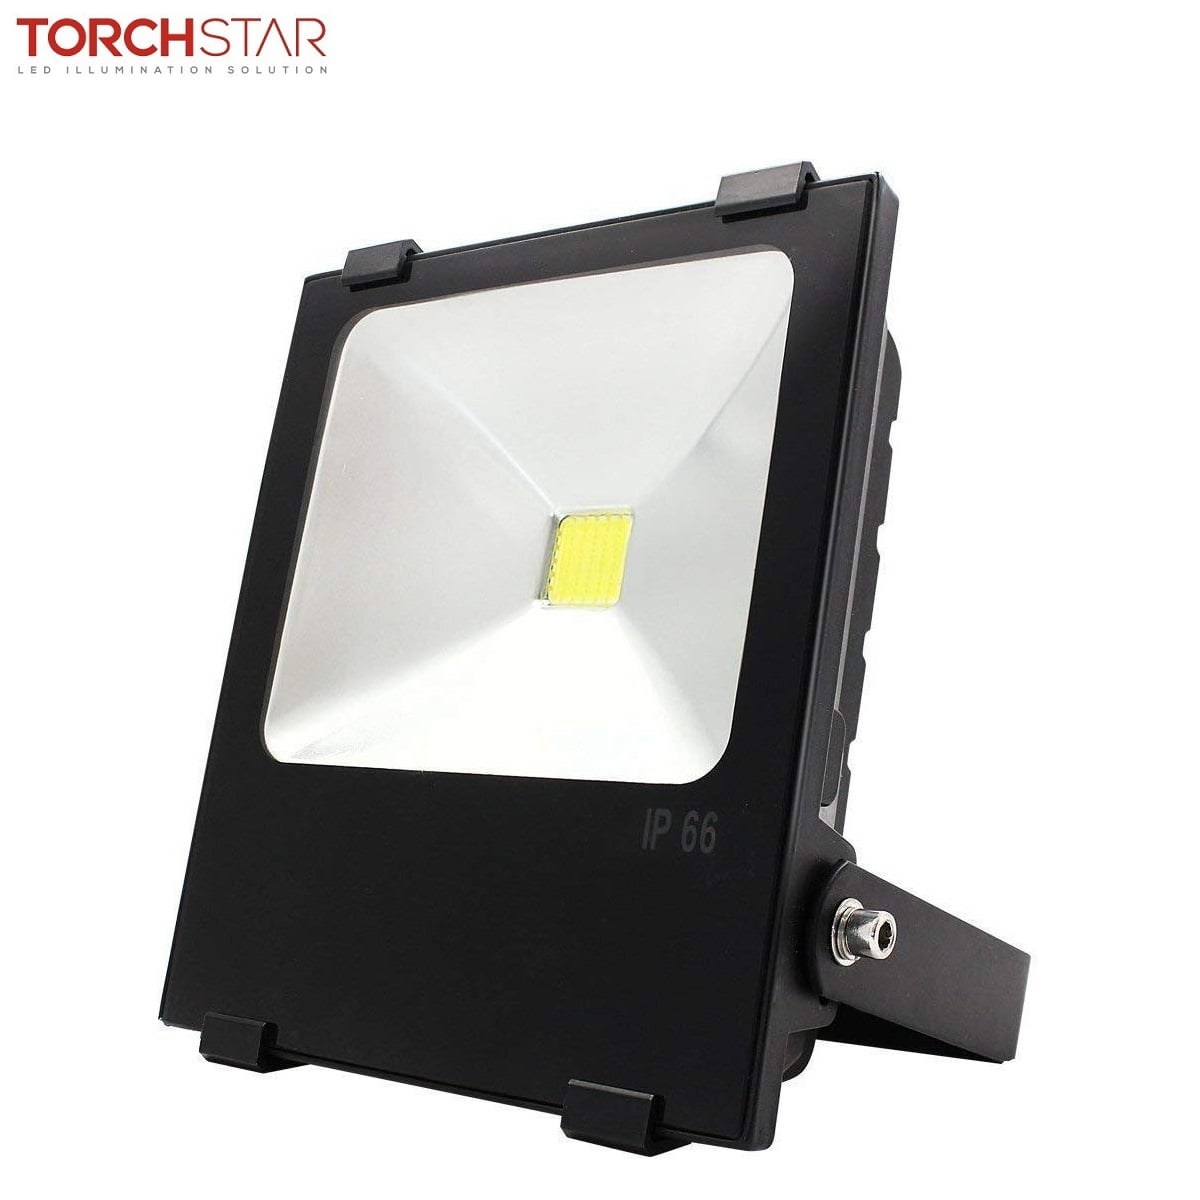 20W Ultra-thin LED Flood Lights Warm White Outdoor Landscape Fixtures 10-PACK 